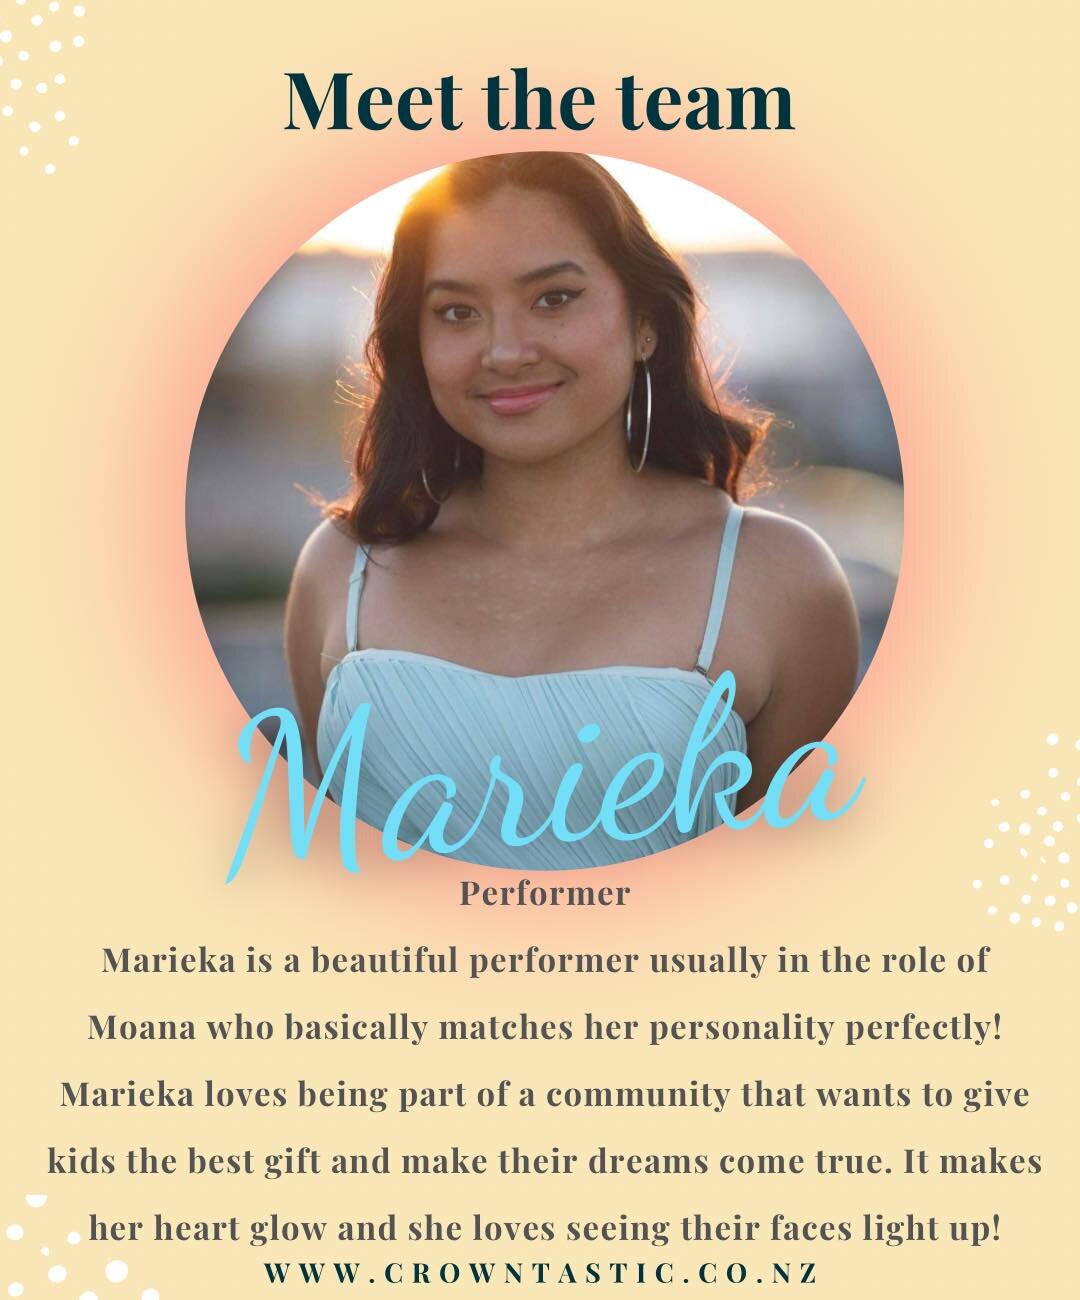 ✨MEET THE TEAM✨ 

Let&rsquo;s hear from Marieka!

🌸My favourite character is Moana because of her spirit, adventurous soul and heart for the ocean which is something I can relate to as I am a water baby. Also wearing flat shoes or even no shoes is a